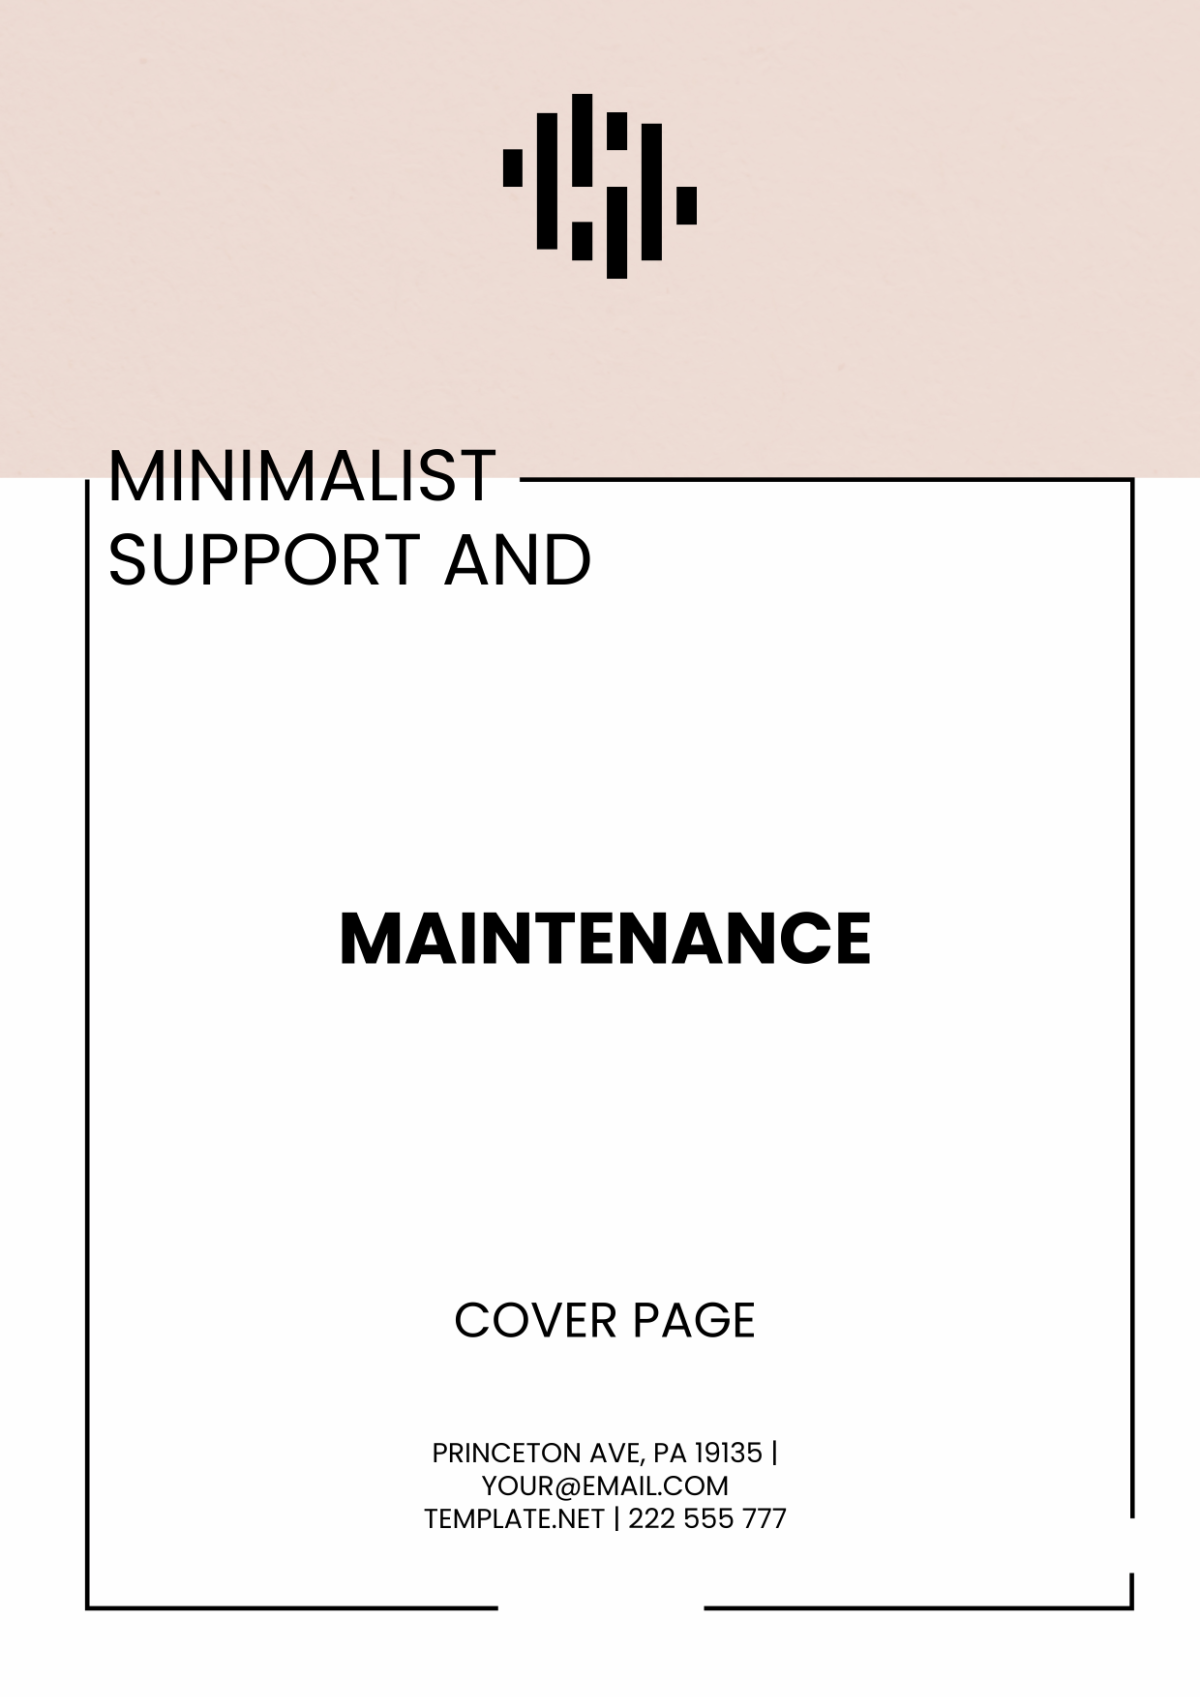 Minimalist Support and Maintenance Cover Page Template